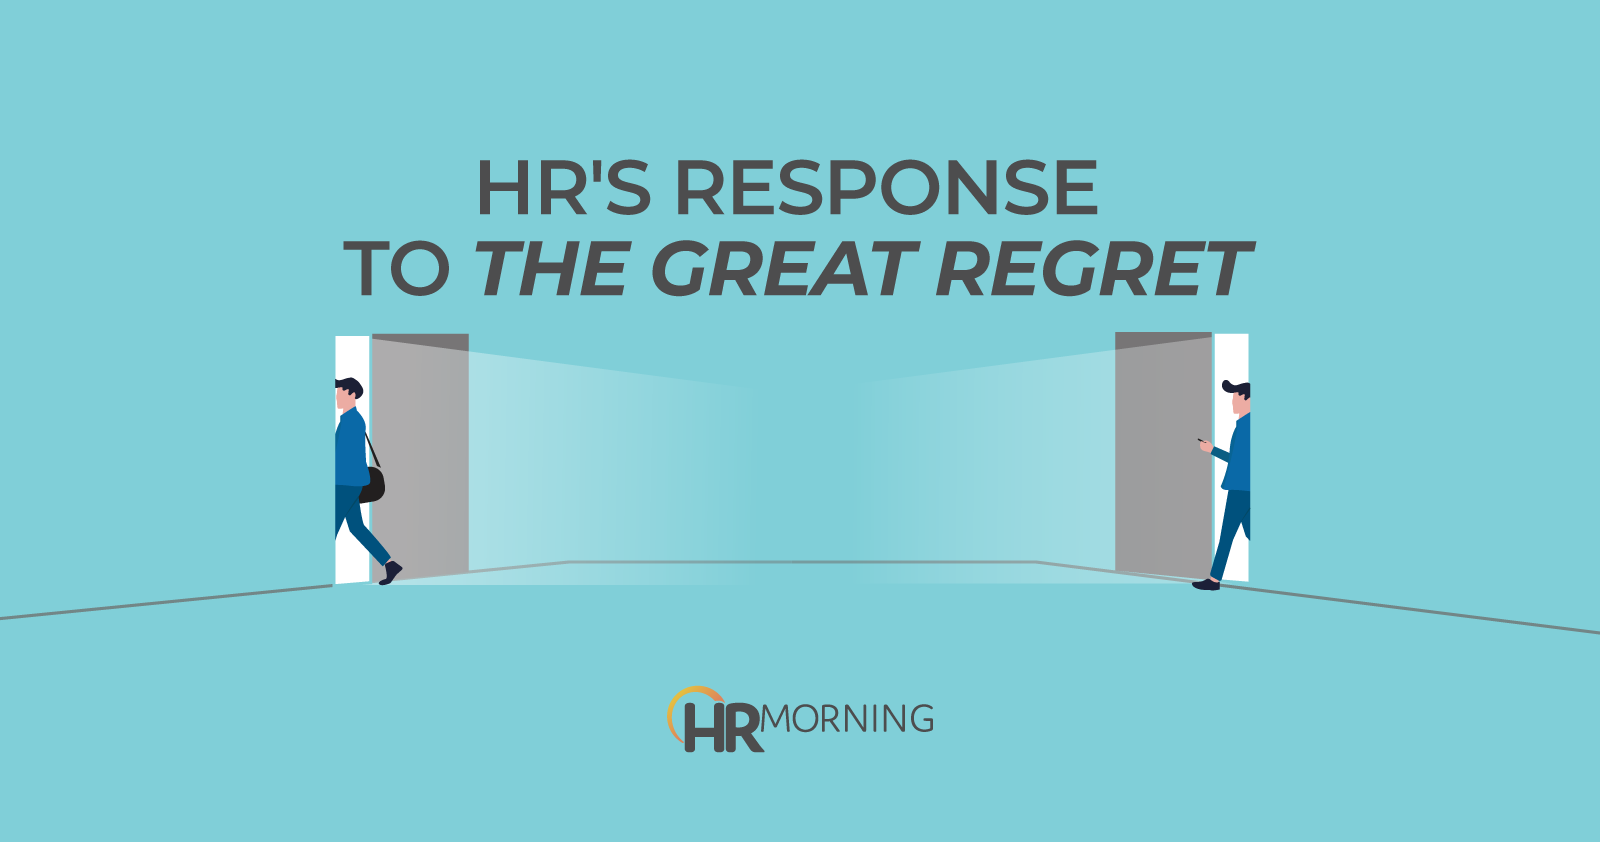 HR's Response to The Great Regret